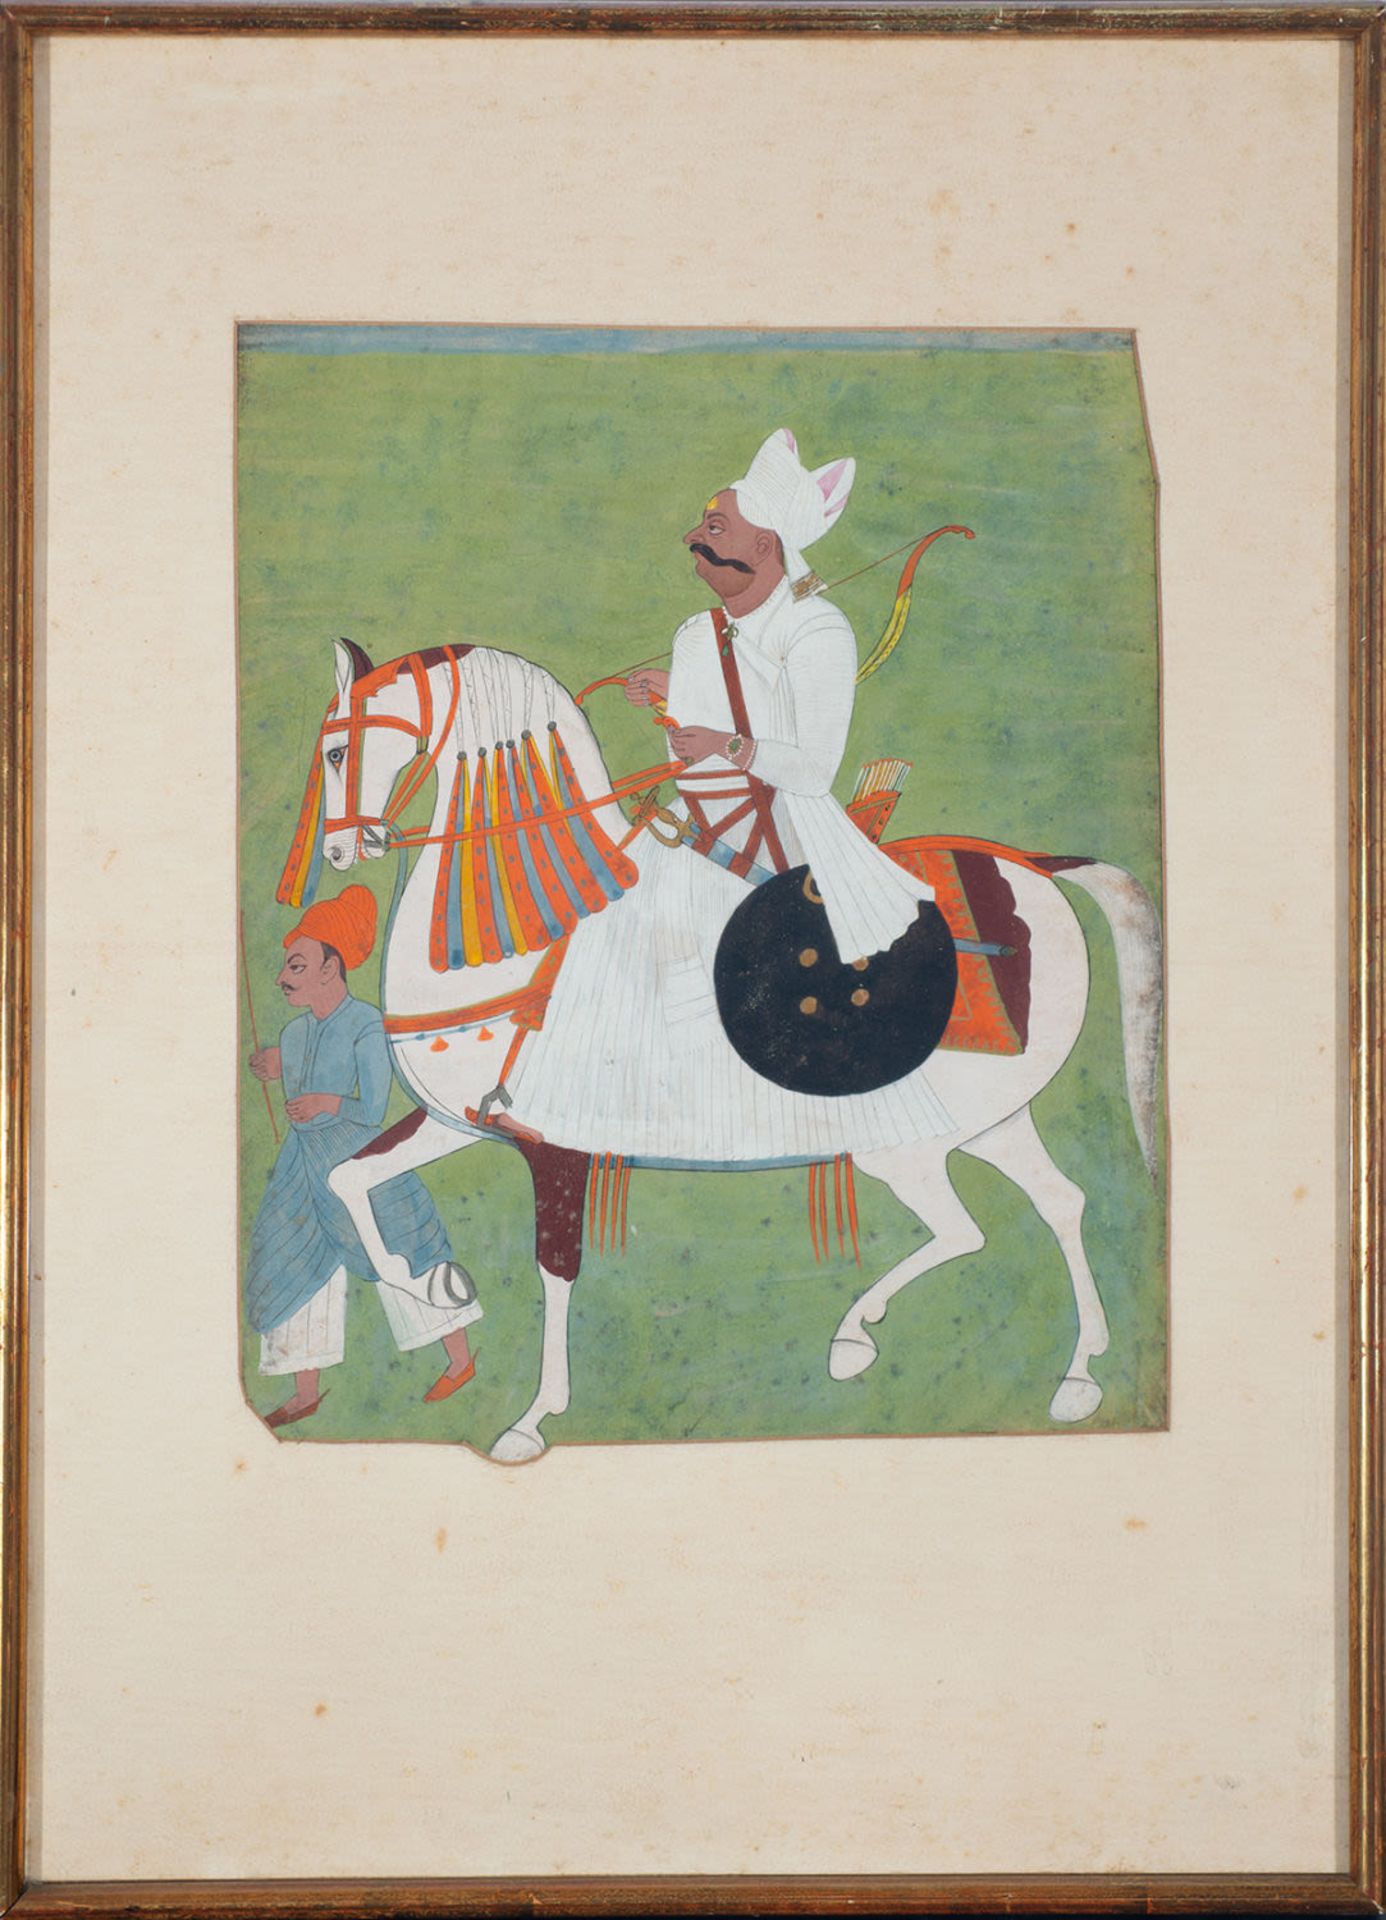 Portrait of Prince on Horseback, Rajasthan, India, possibly 18th - 19th century